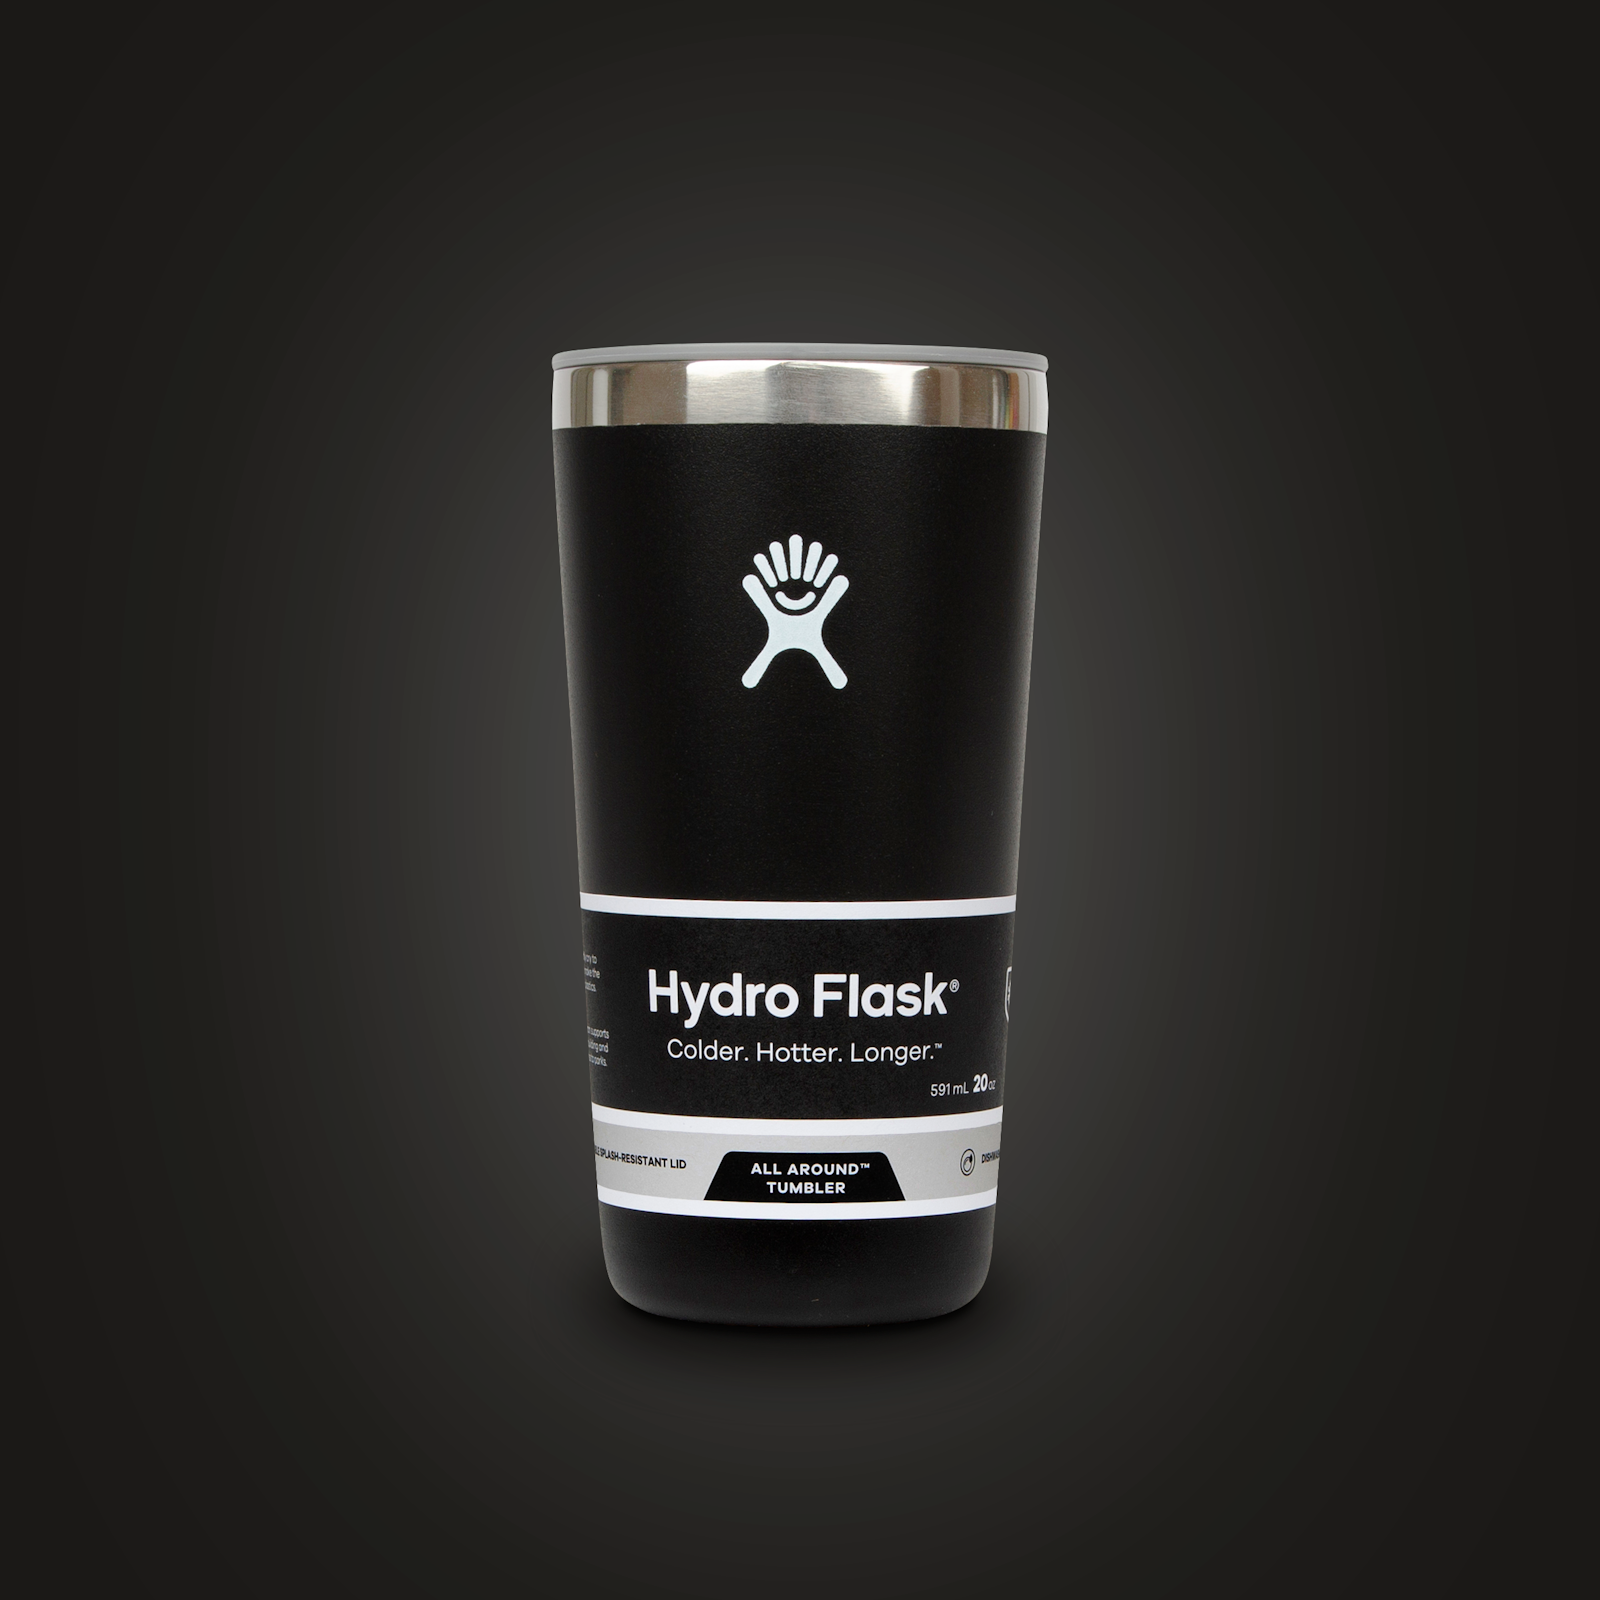 https://capsule-us.imgix.net/work/HydroFlask-Tumbler-All-Around-black-BLACK-22.png?fit=clip&q=80&w=1600